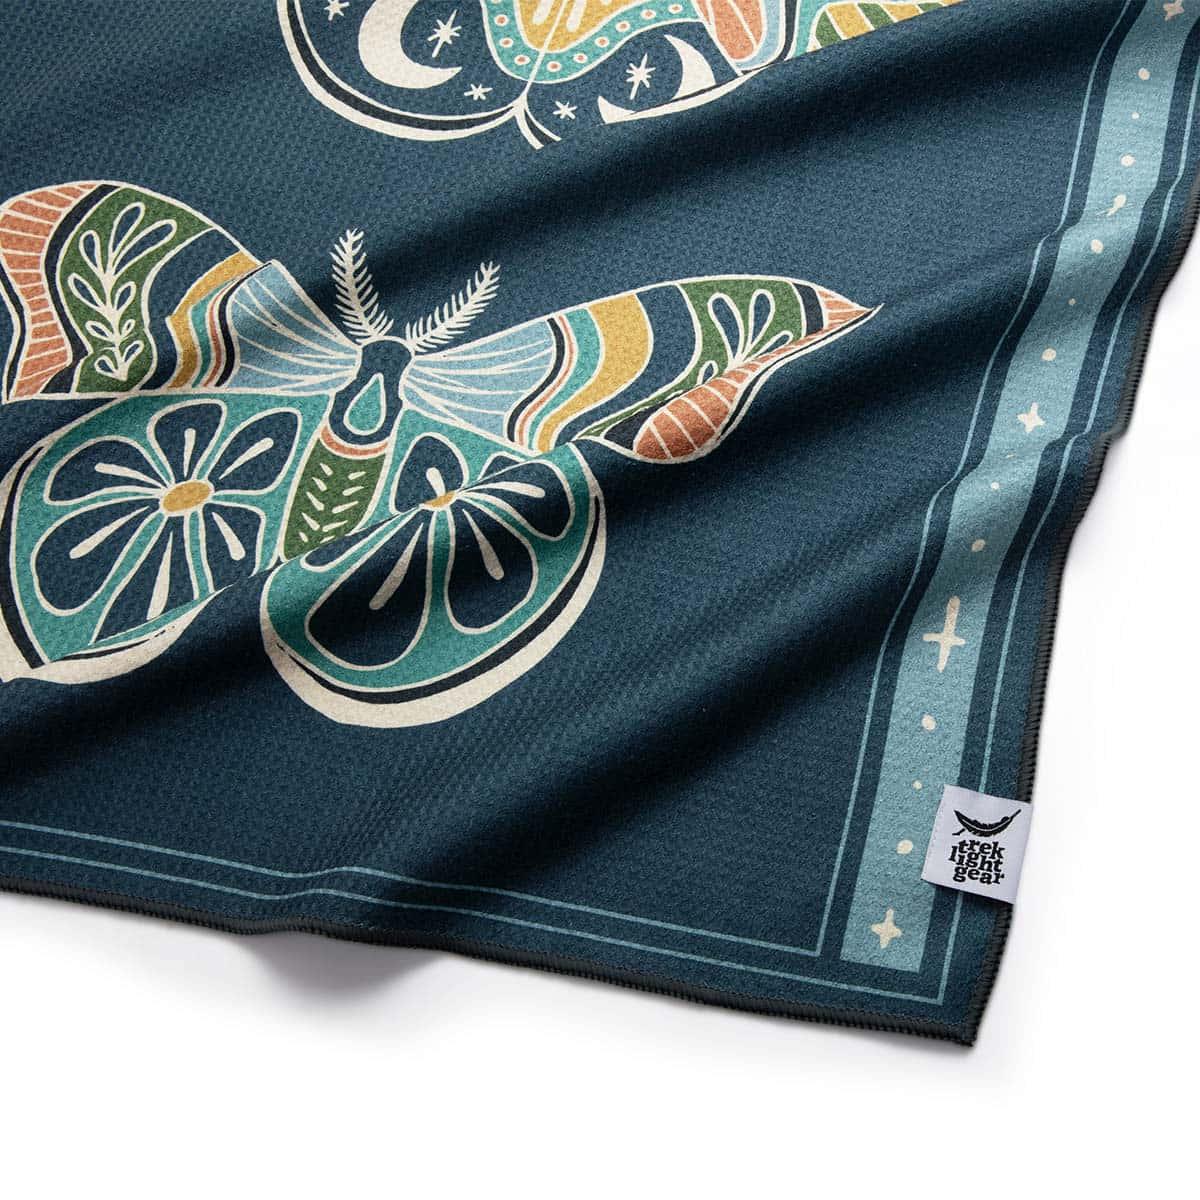 Painted Moth Yoga Towel. Grip Texture. Compact Travel Pouch. Quick